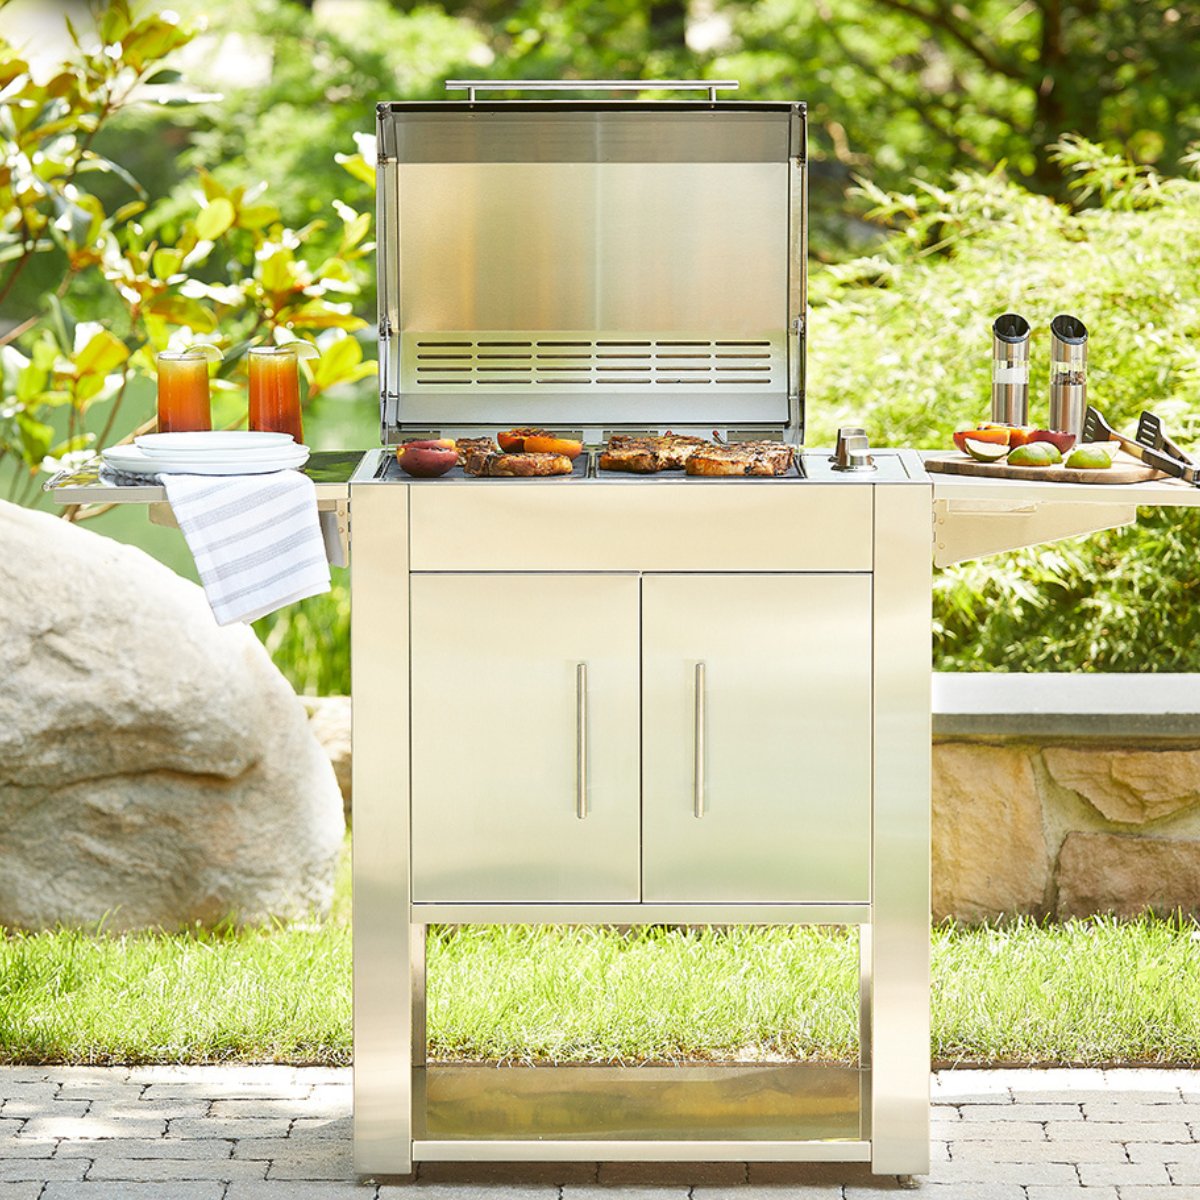 Kenyon Texan Free-Standing Electric Grill - Kitchen In The Garden